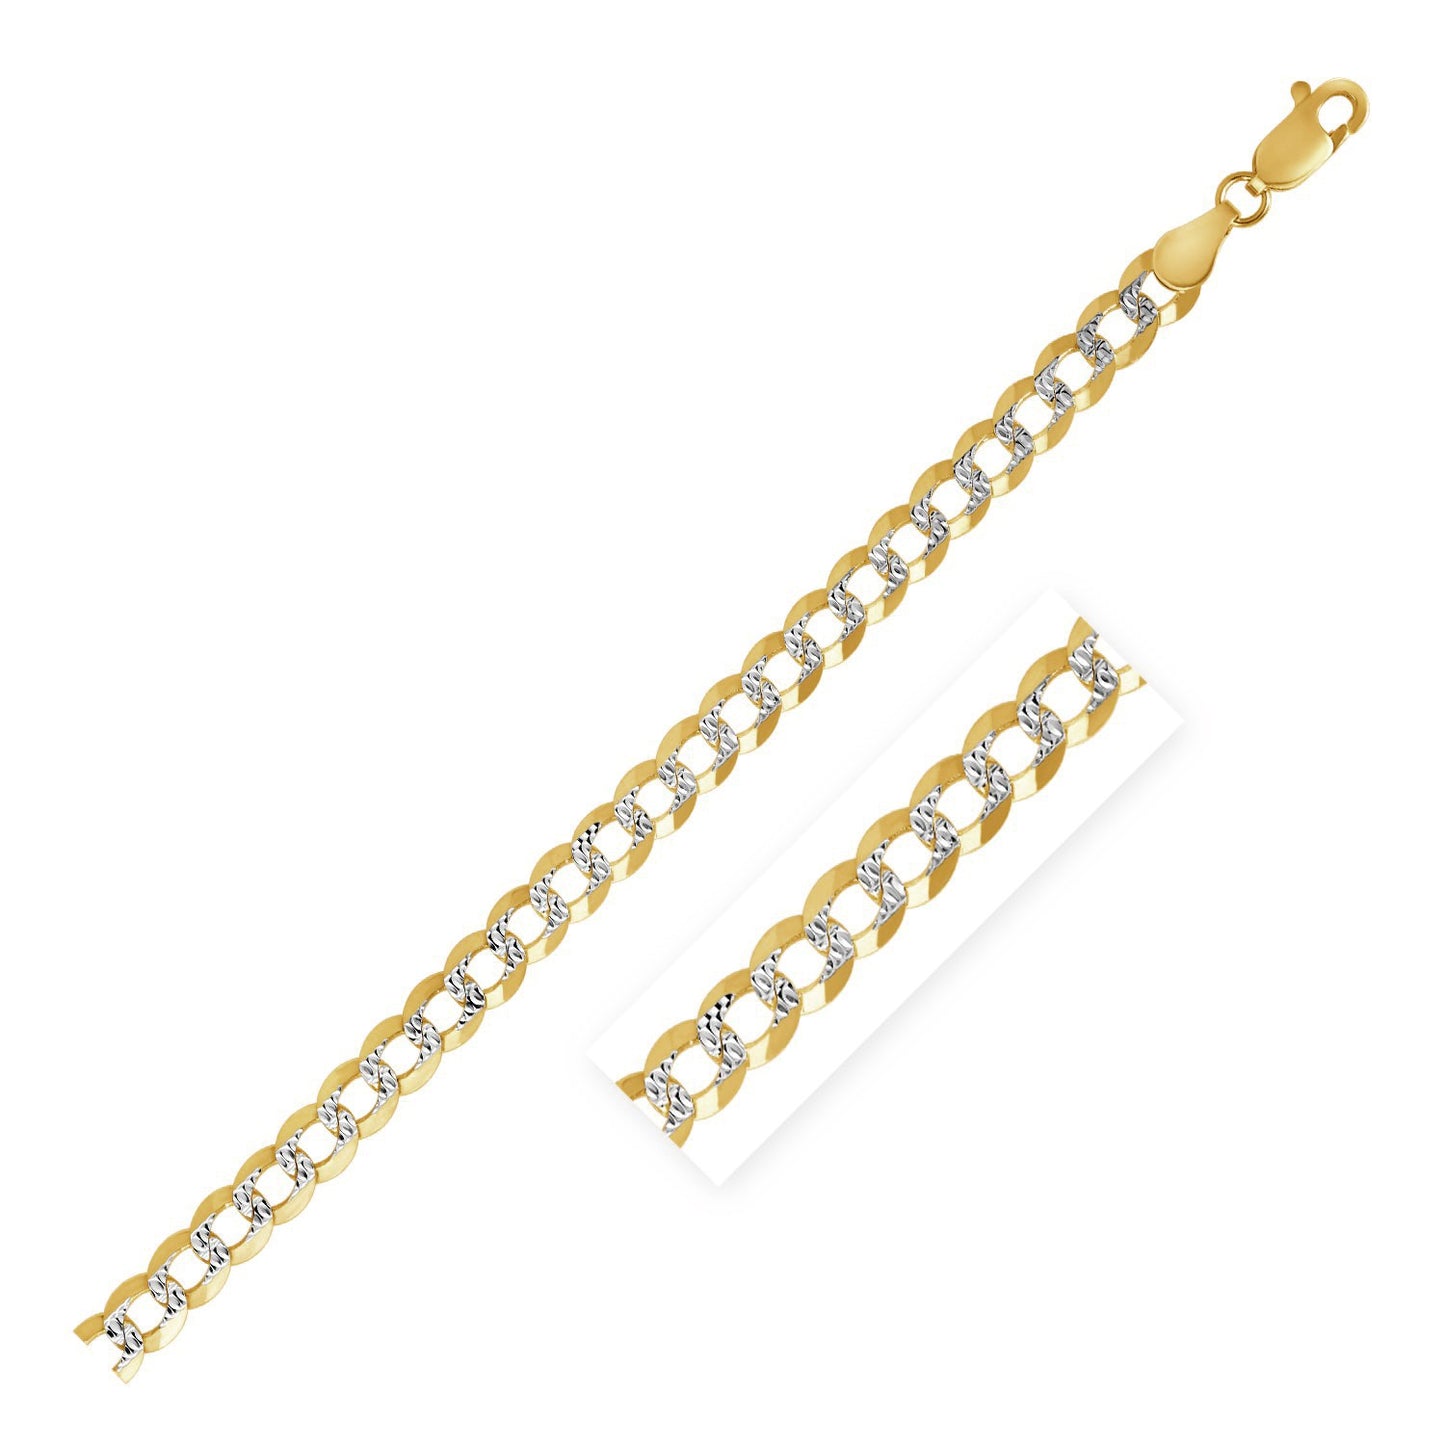 3.2 mm 14k Two Tone Gold Pave Curb Chain